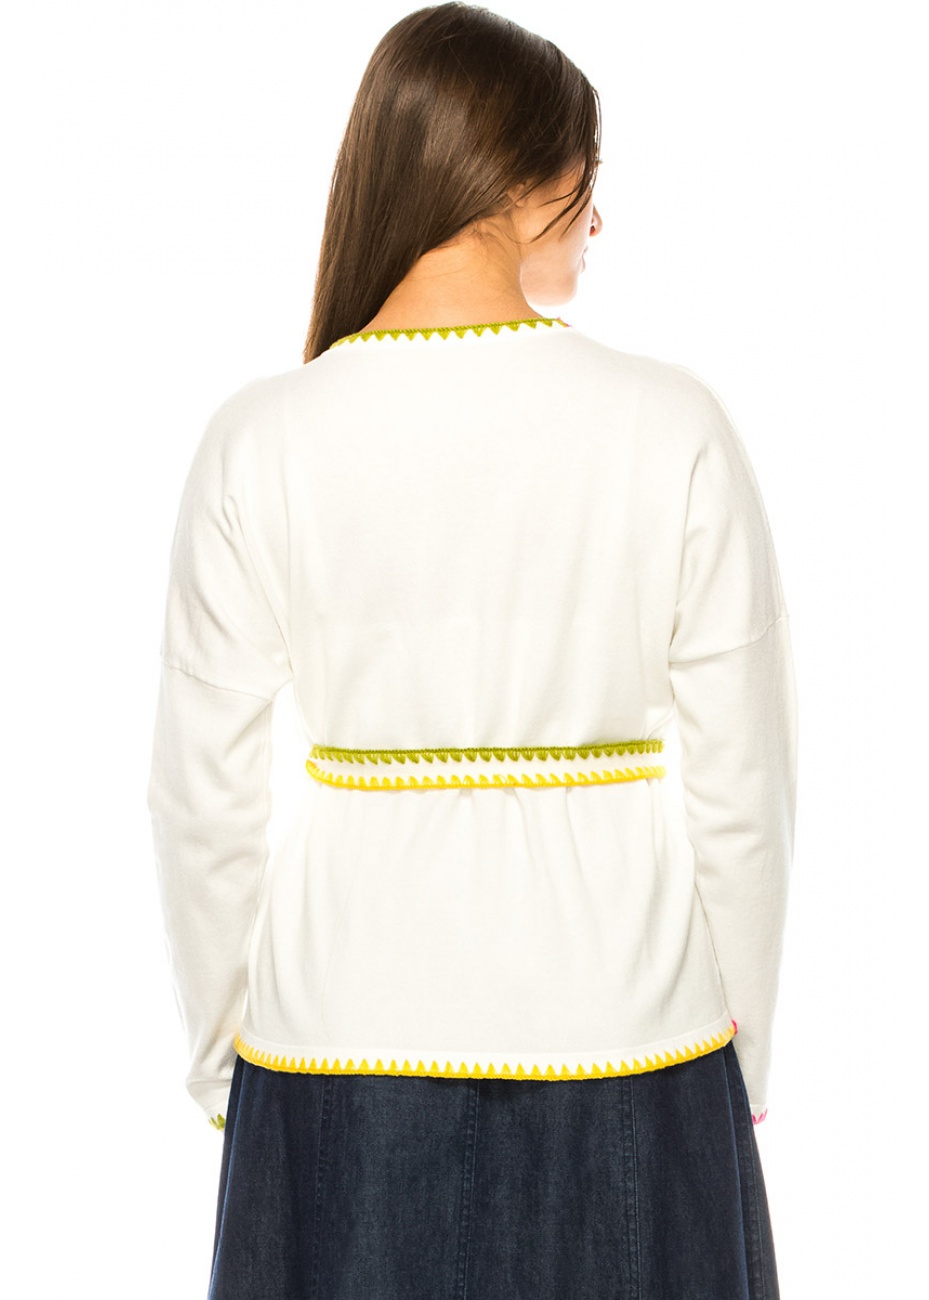 Crew Neck Cardigan With A Belt In White